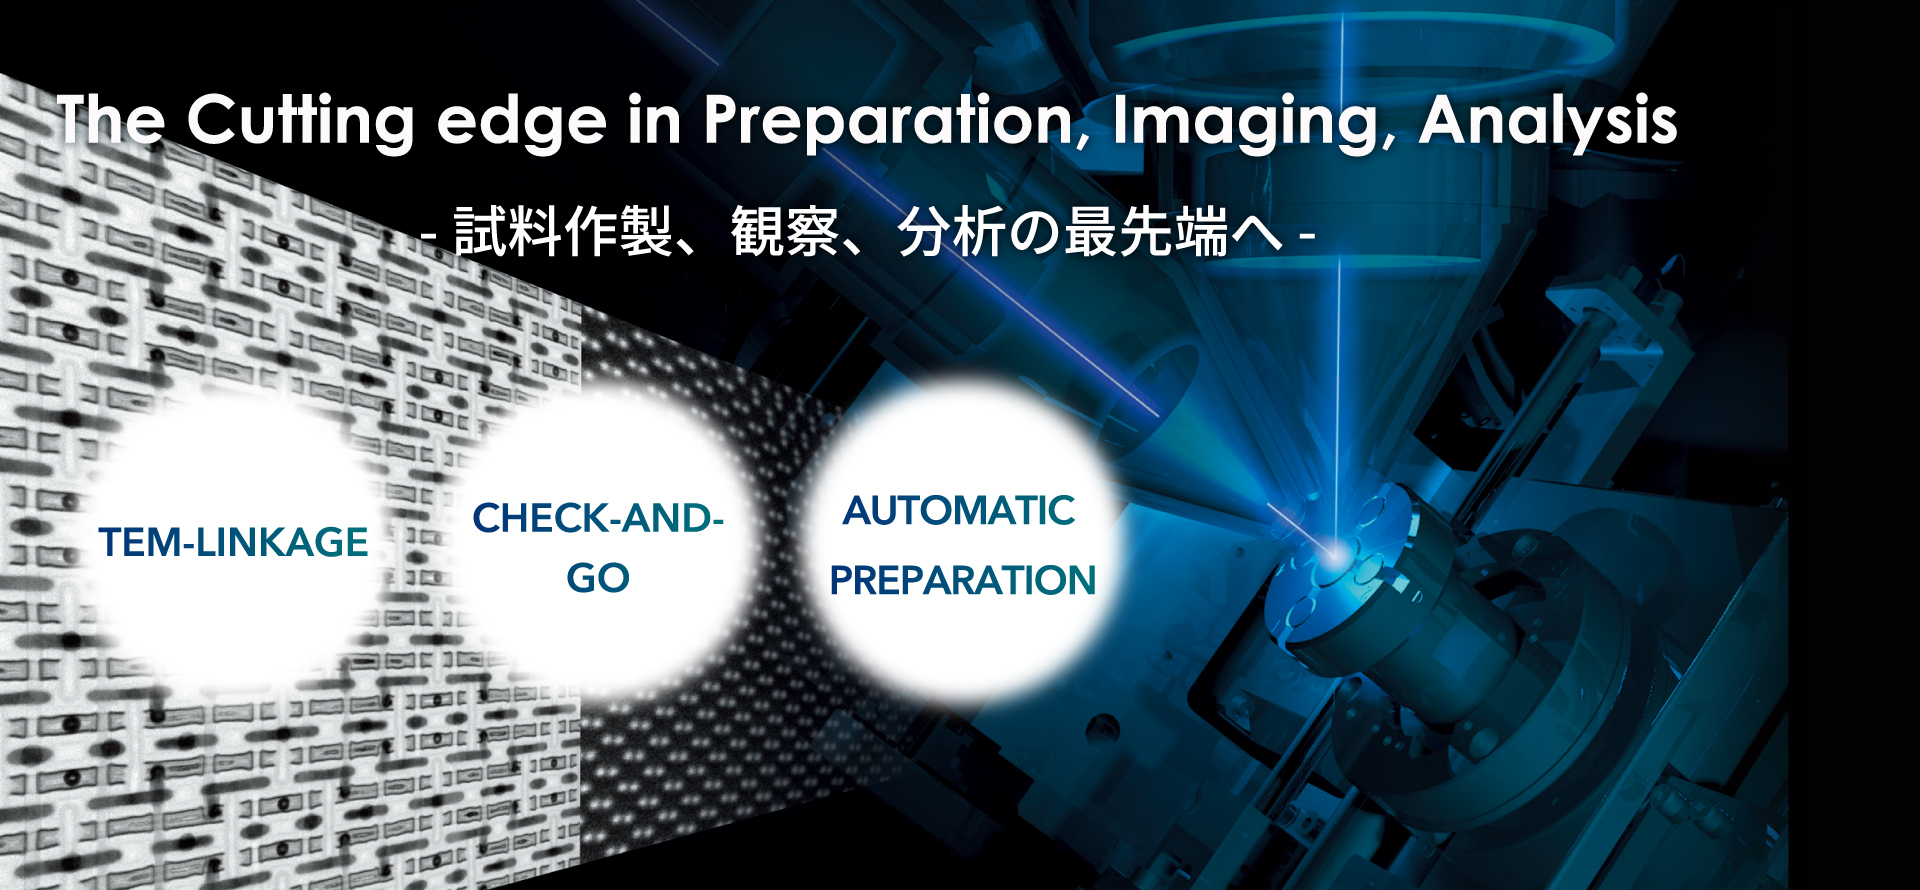 The cutting edge in Preparation, Imaging, Analysis - 試料作製、観察・分析の最先端へ -